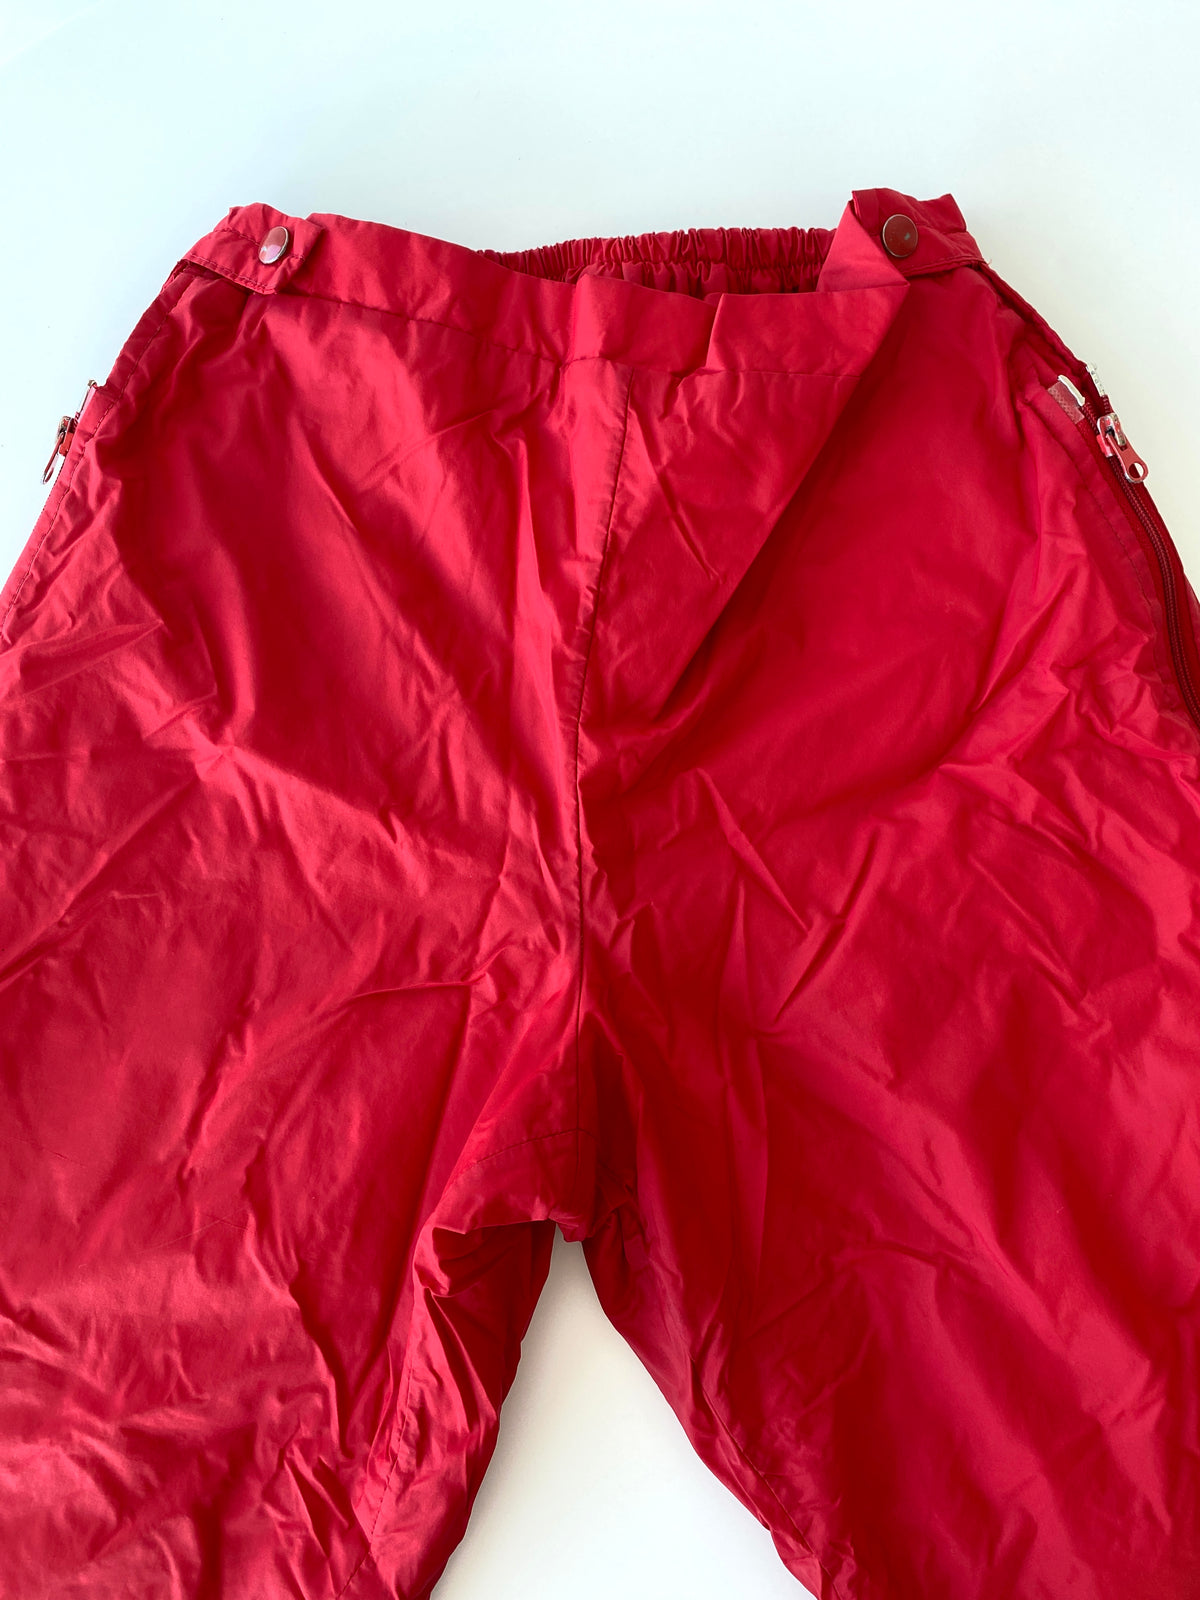 Vintage Red Ski Pants with Leg Zippers